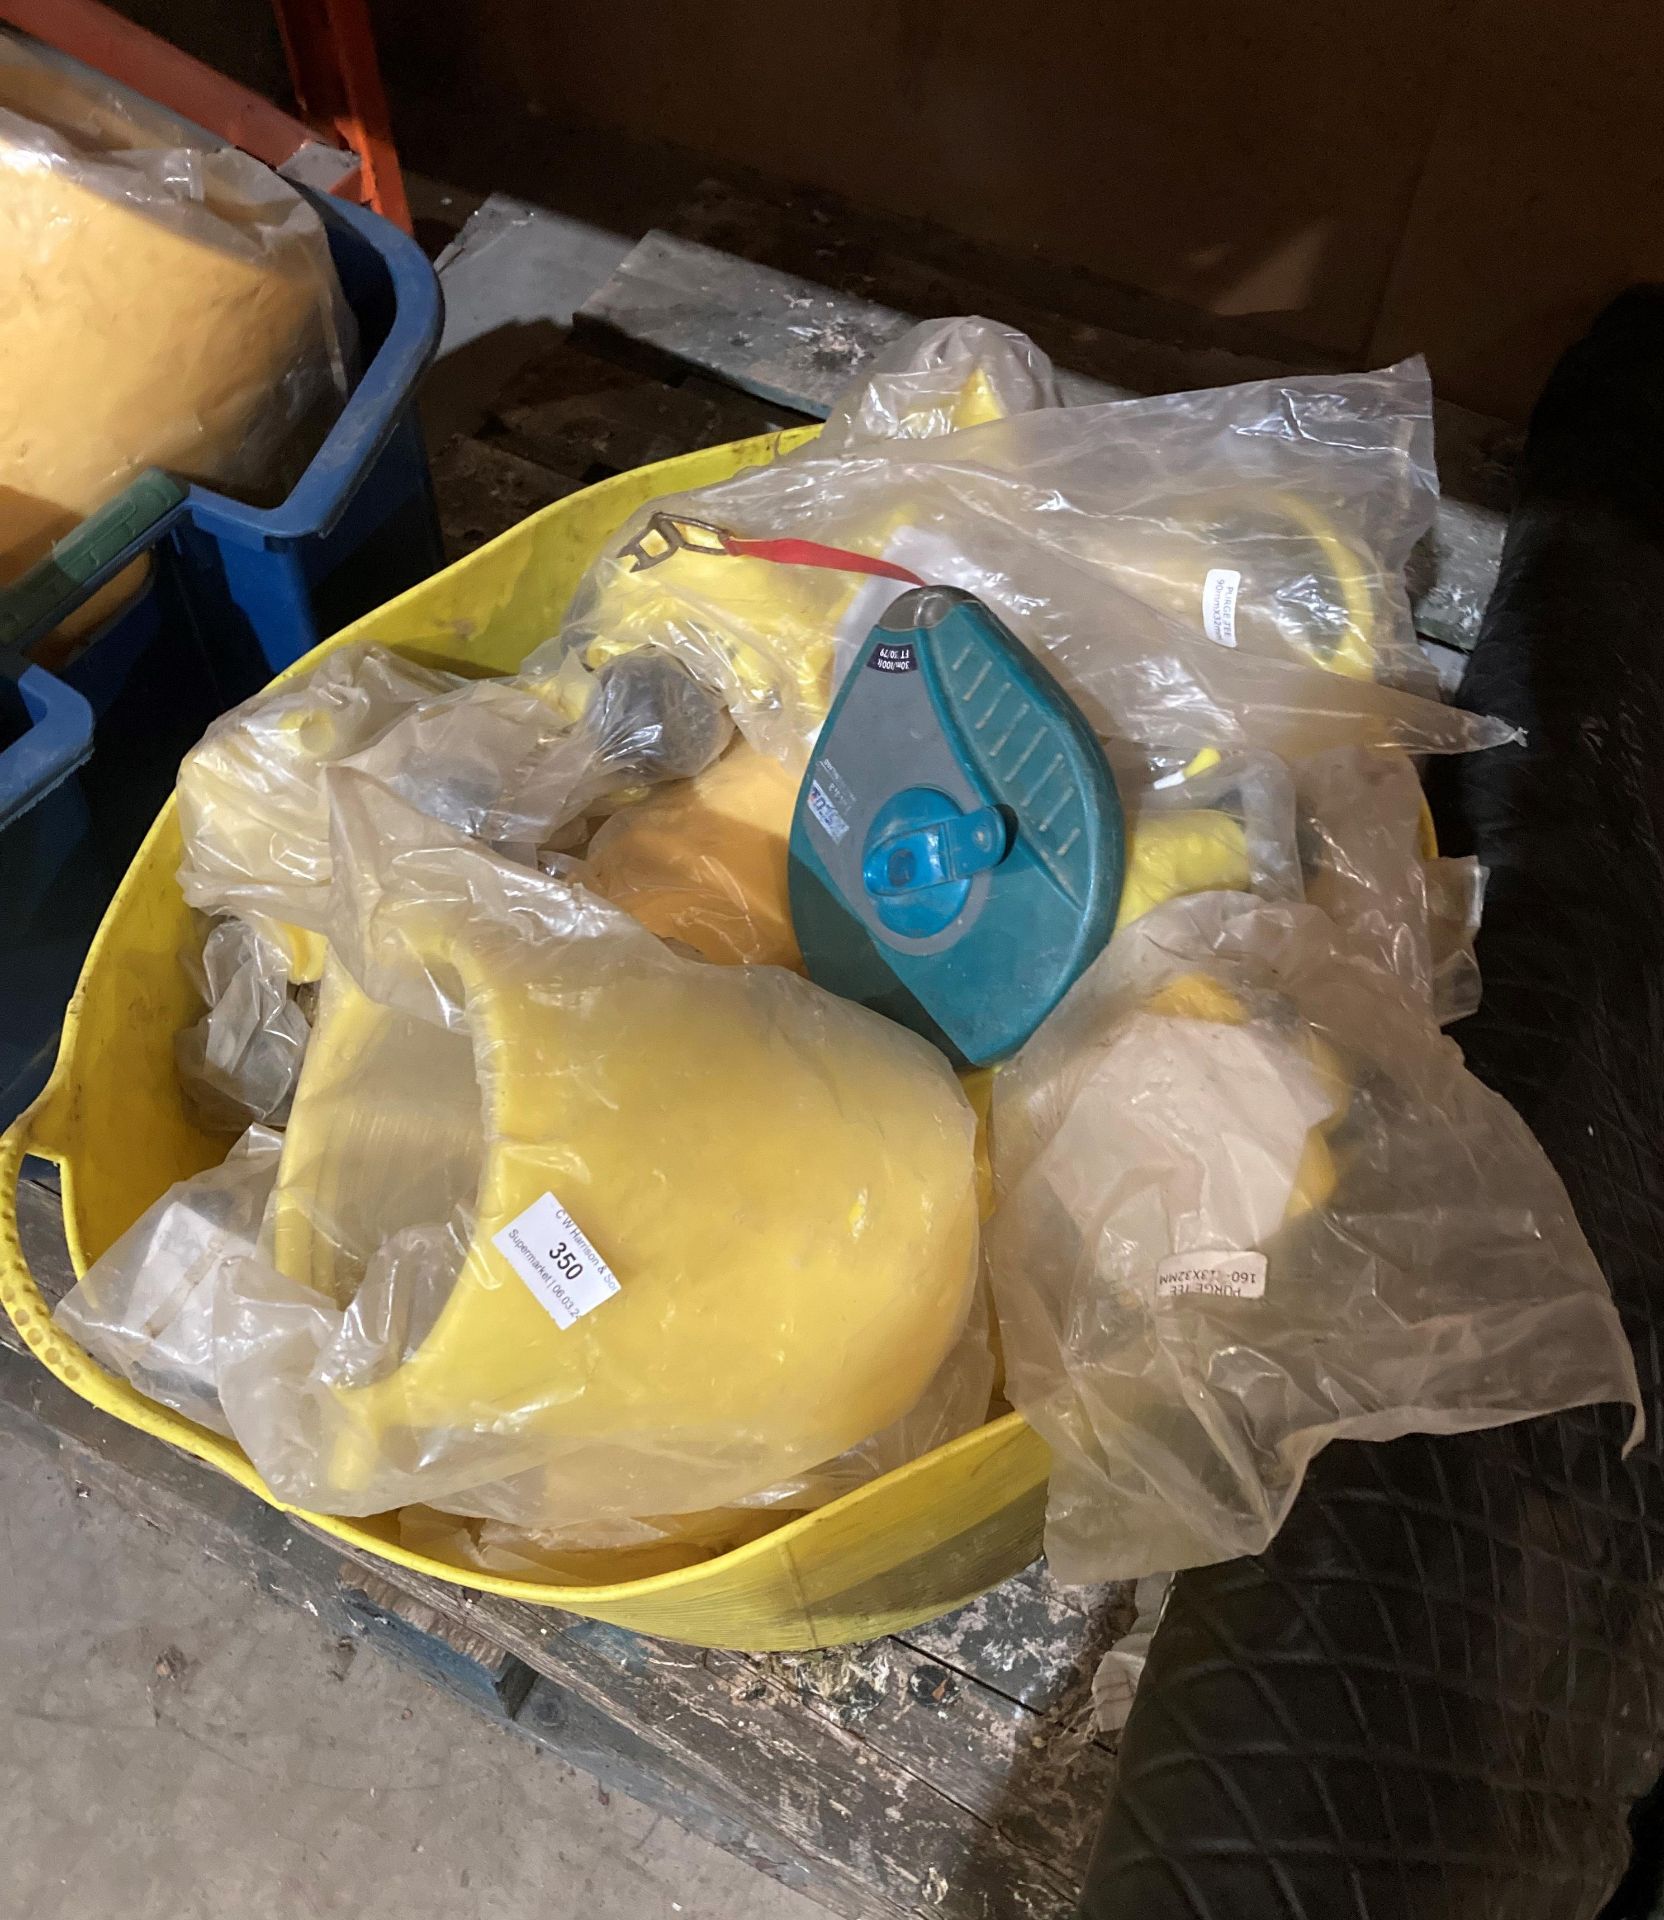 Contents to under-shelf area - yellow plastic pipe fittings, tape measure, - Image 3 of 4